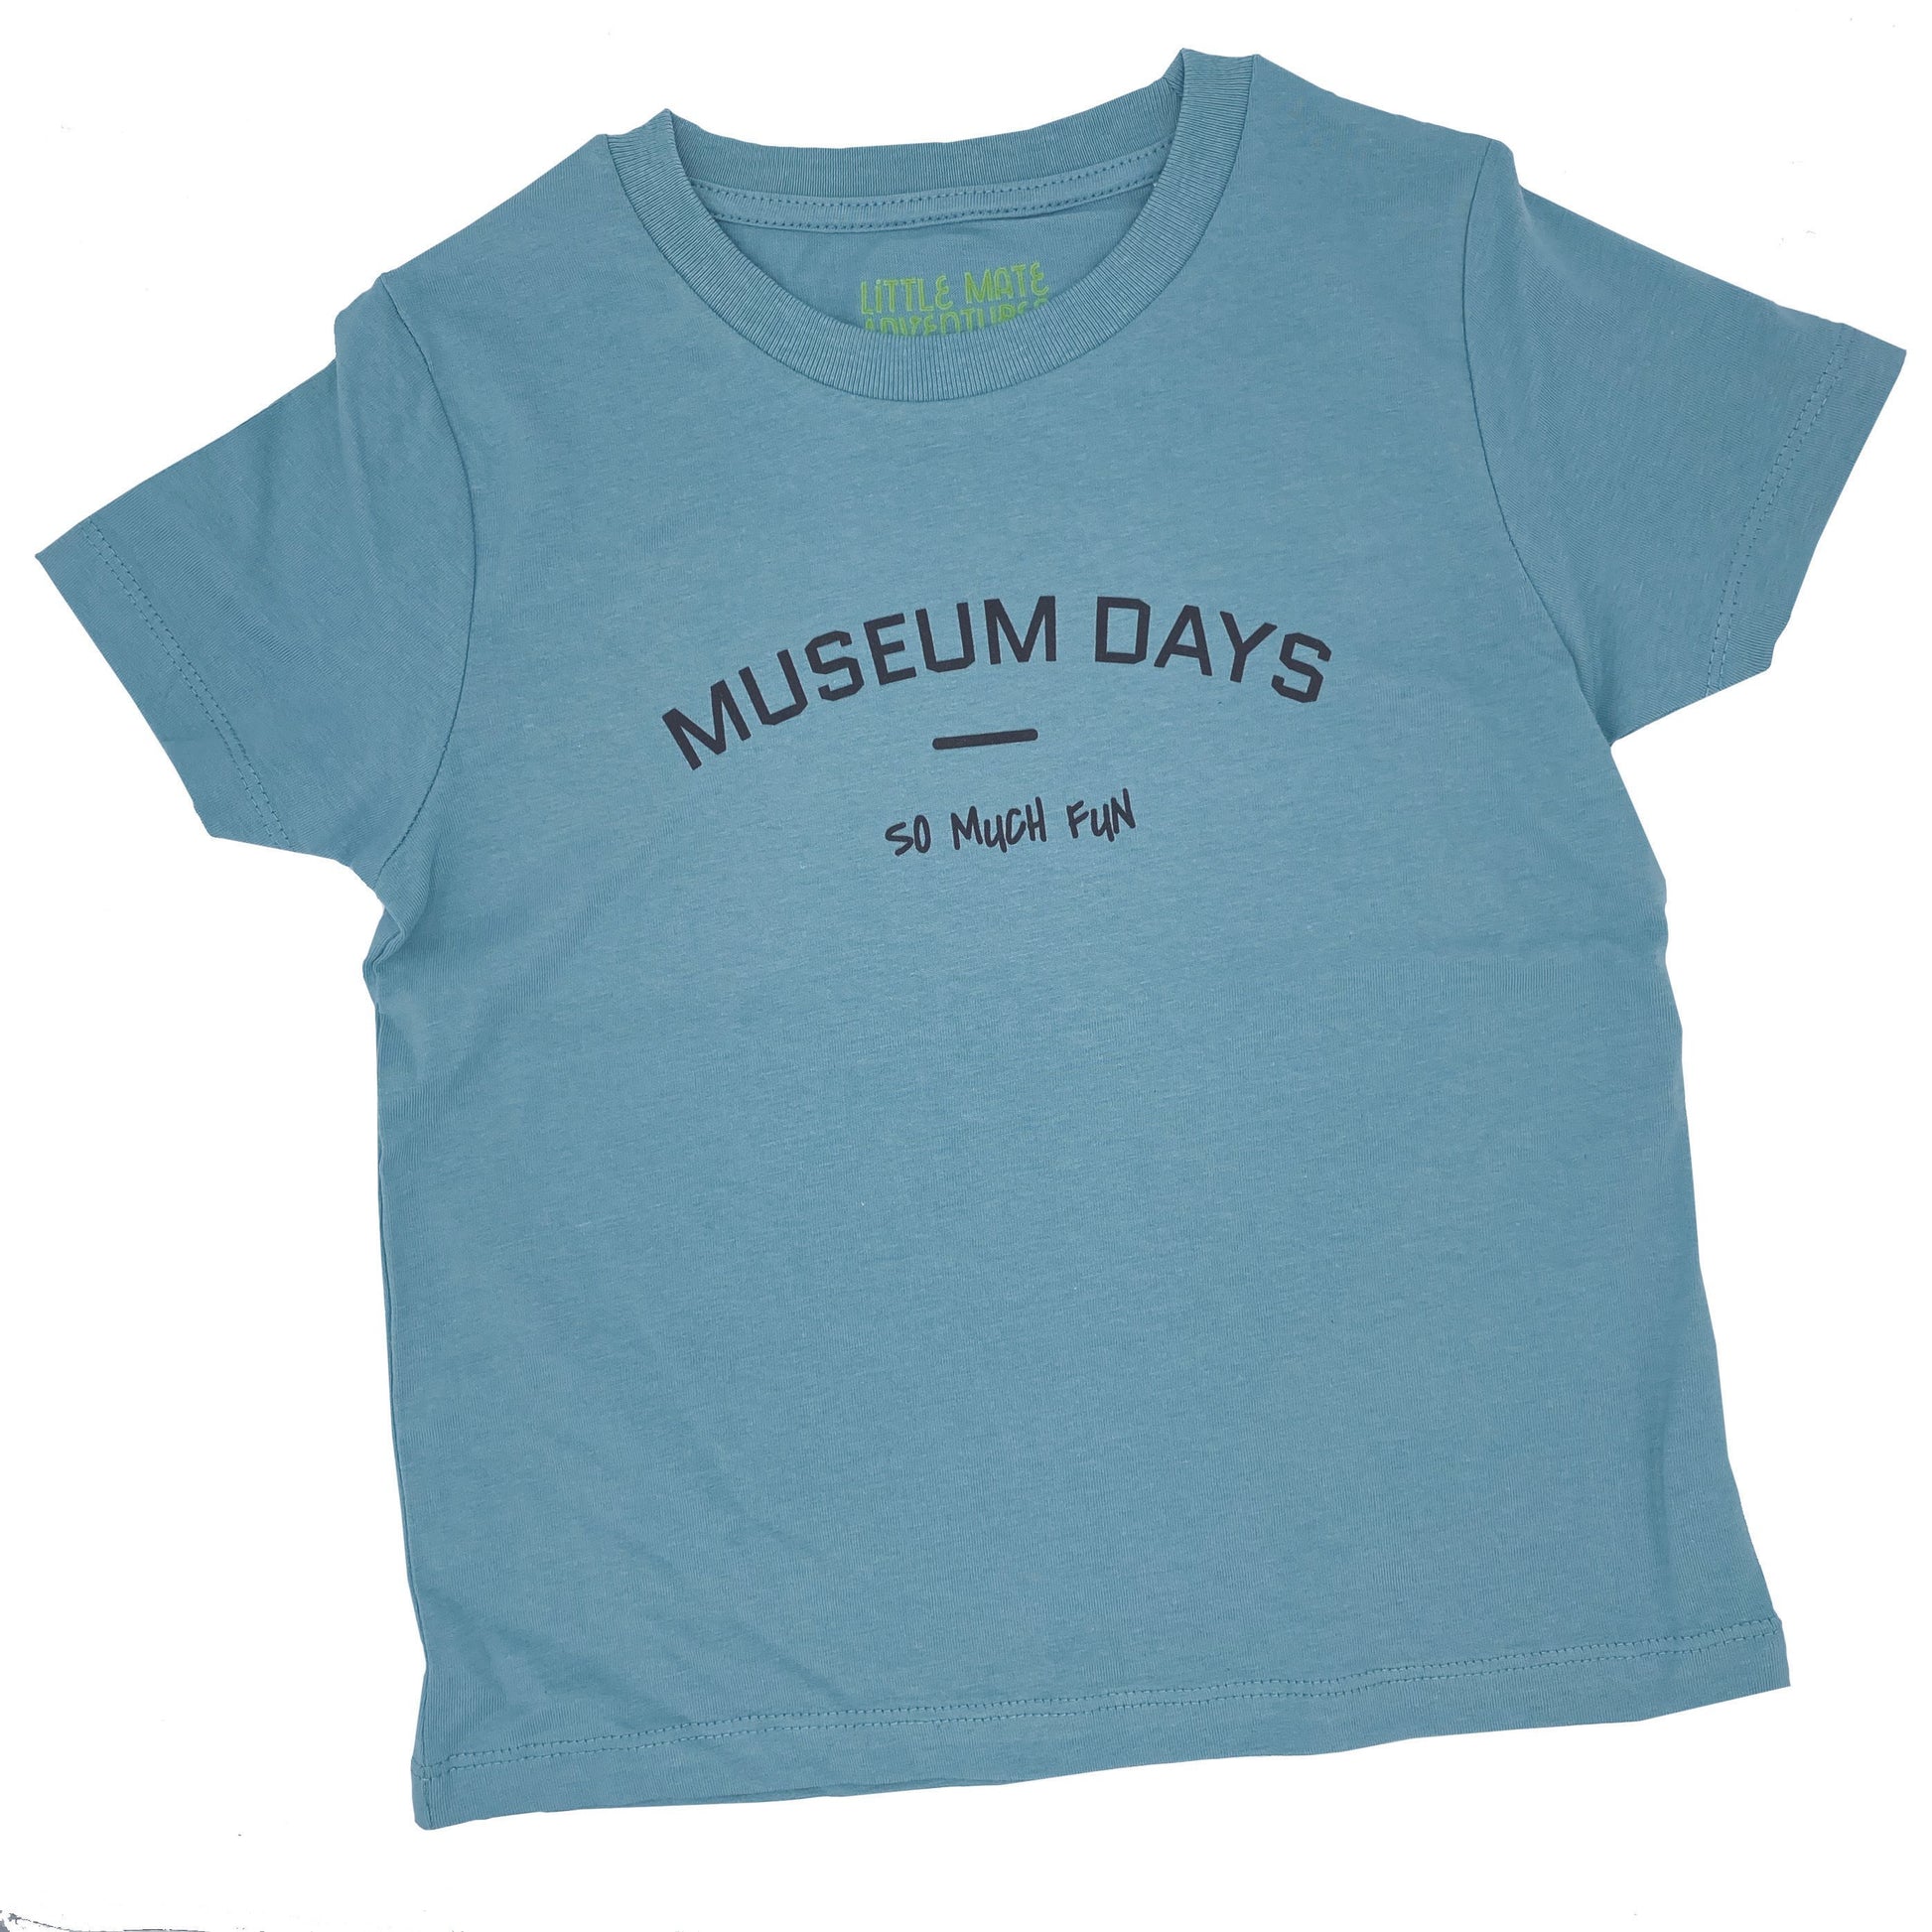 MUSEUM DAYS SO MUCH FUN - Best Selling Kids T-Shirt - Little Mate Adventures